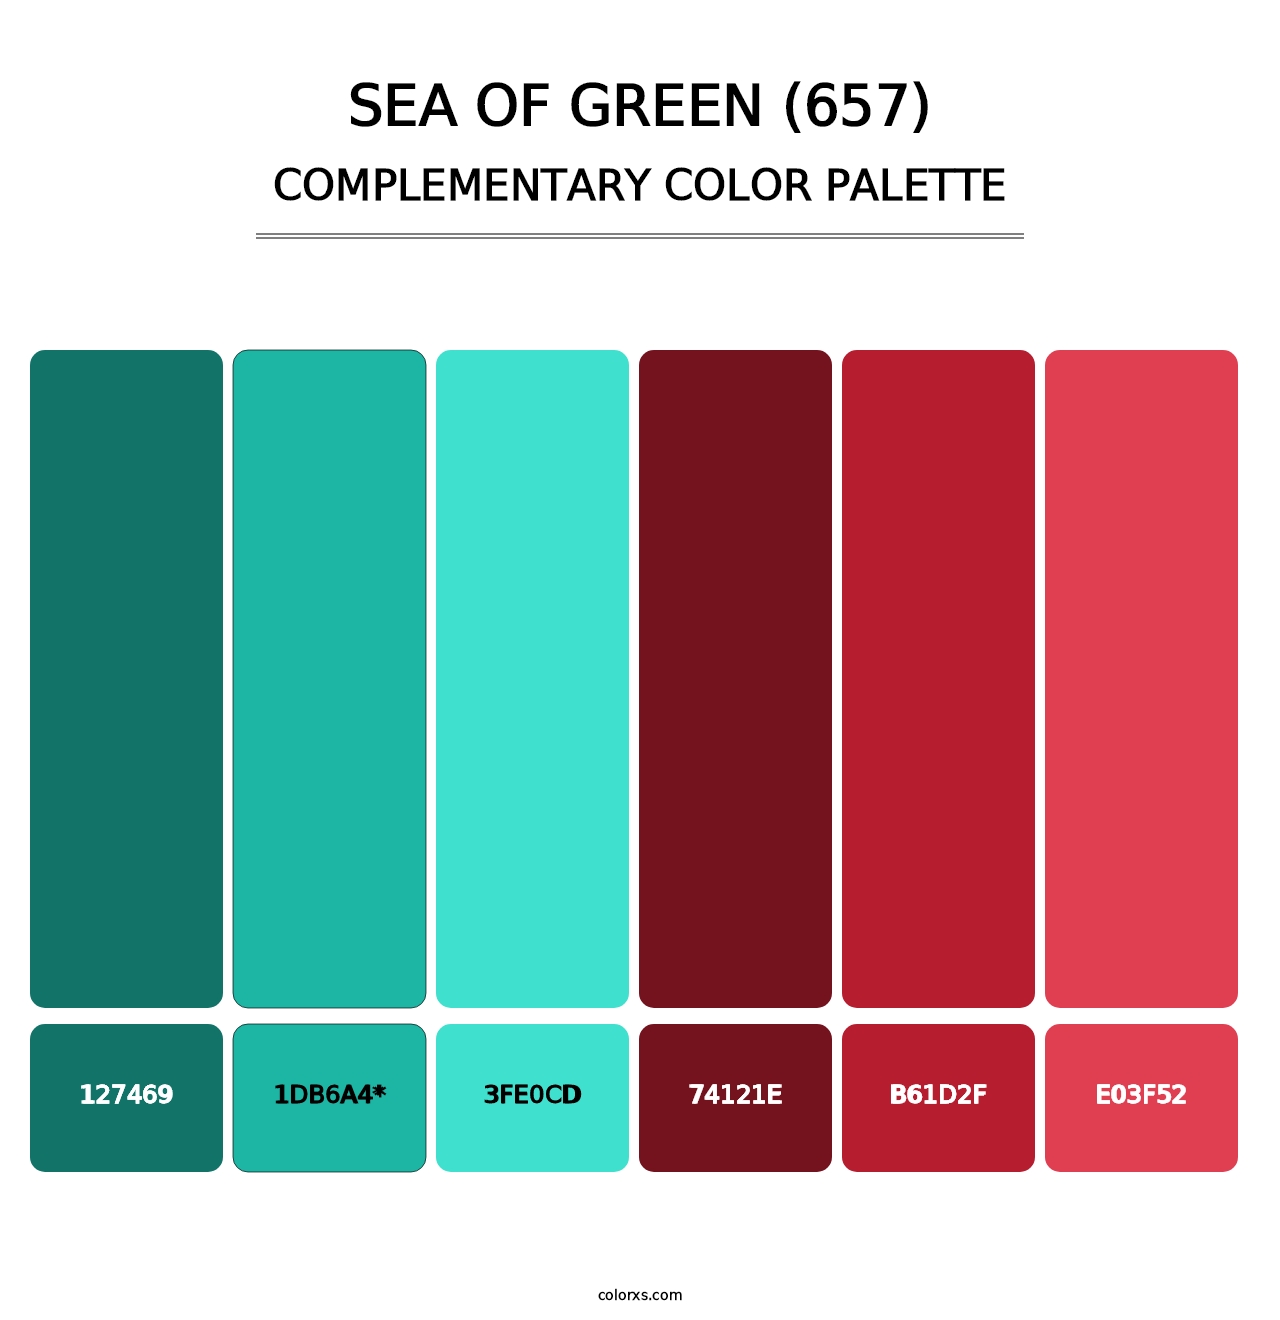 Sea of Green (657) - Complementary Color Palette